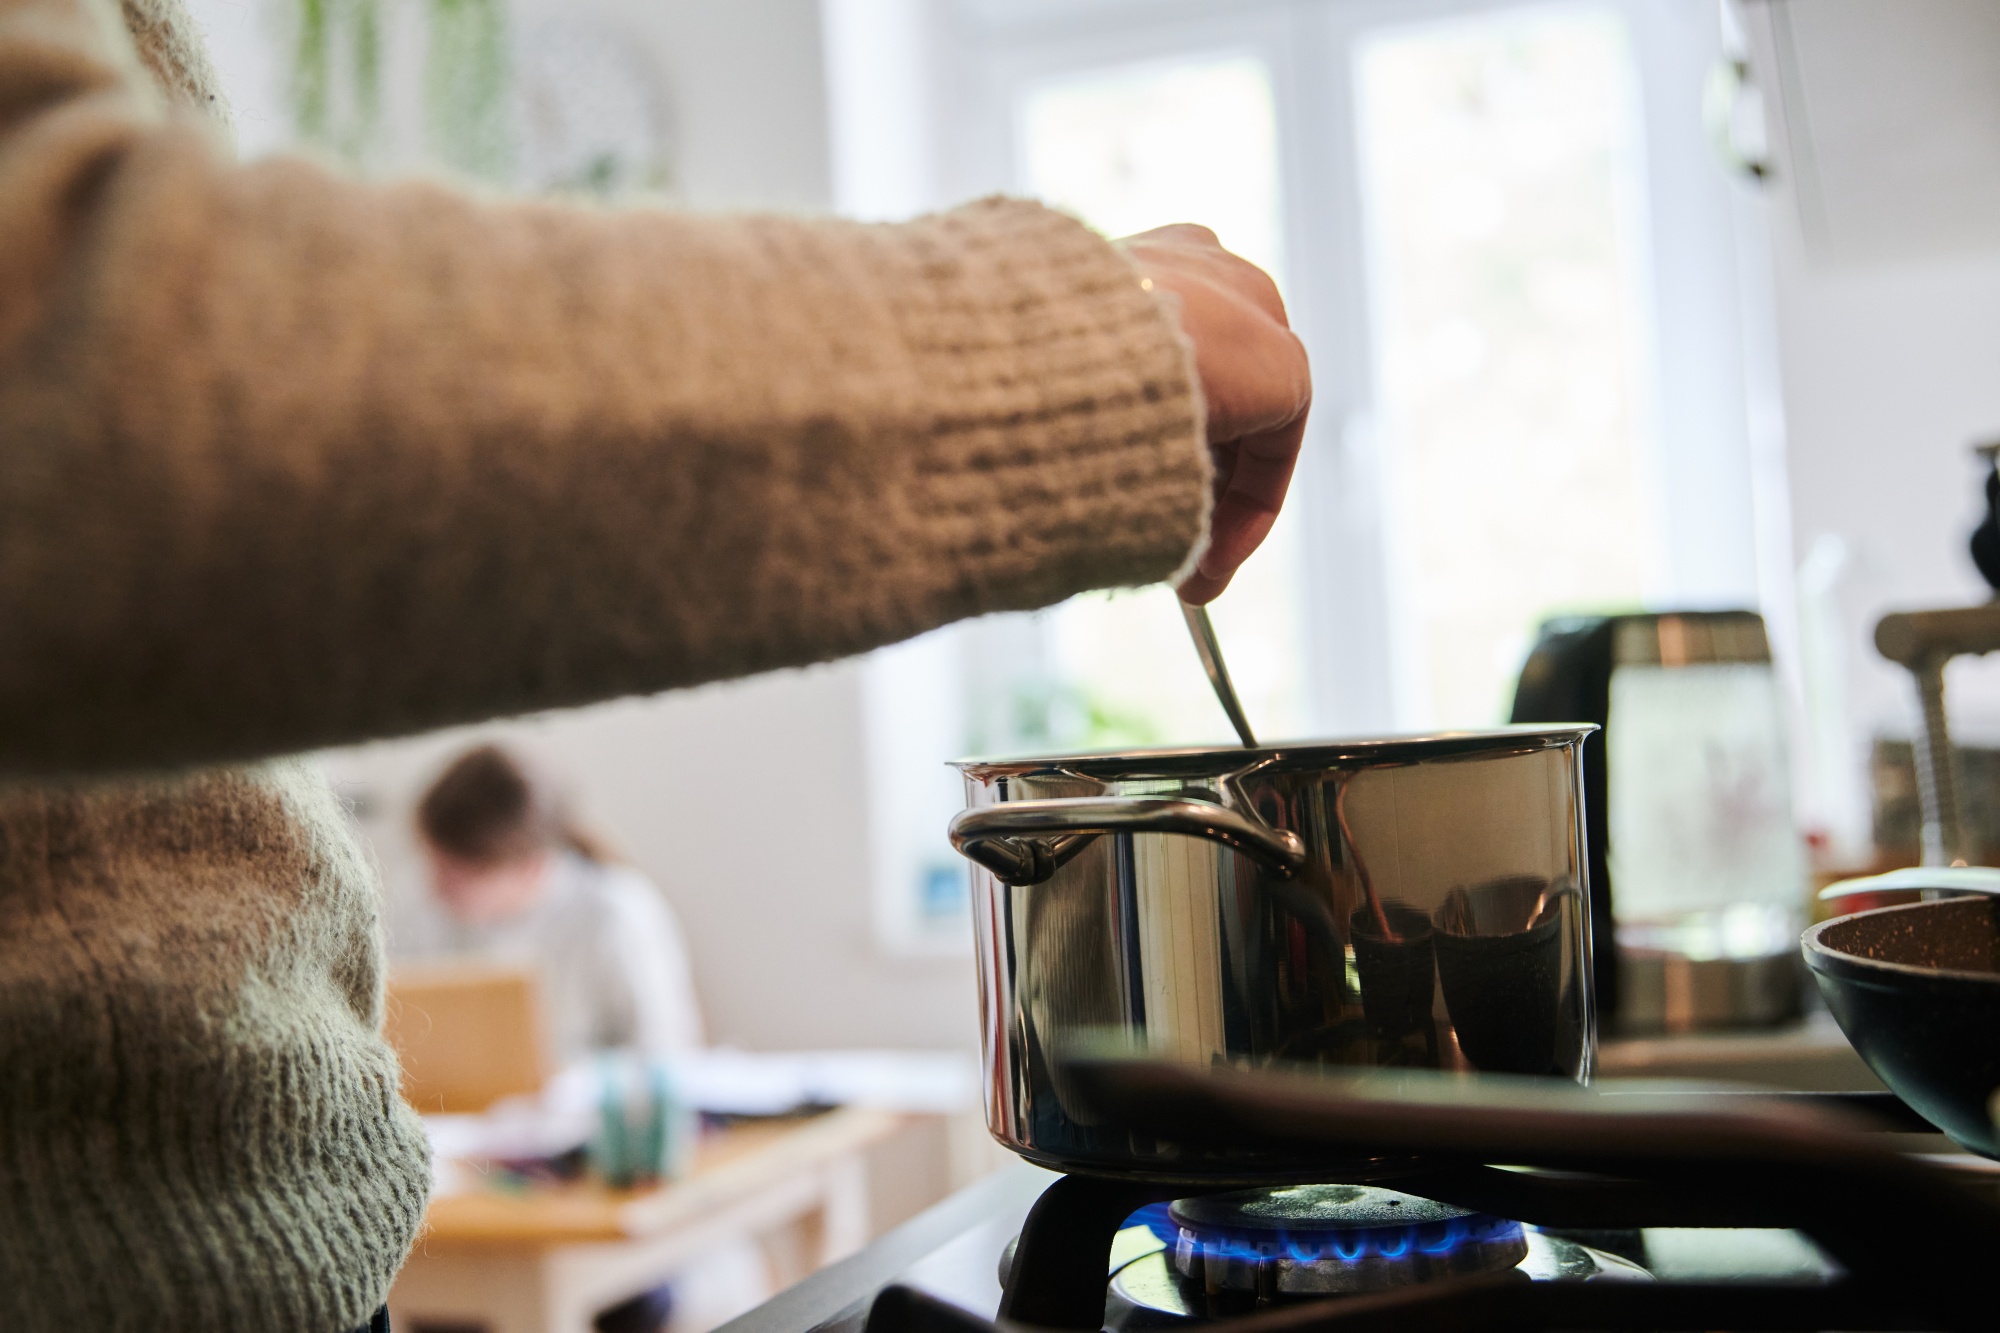 Have a gas stove? How to reduce pollution that may harm health - Harvard  Health